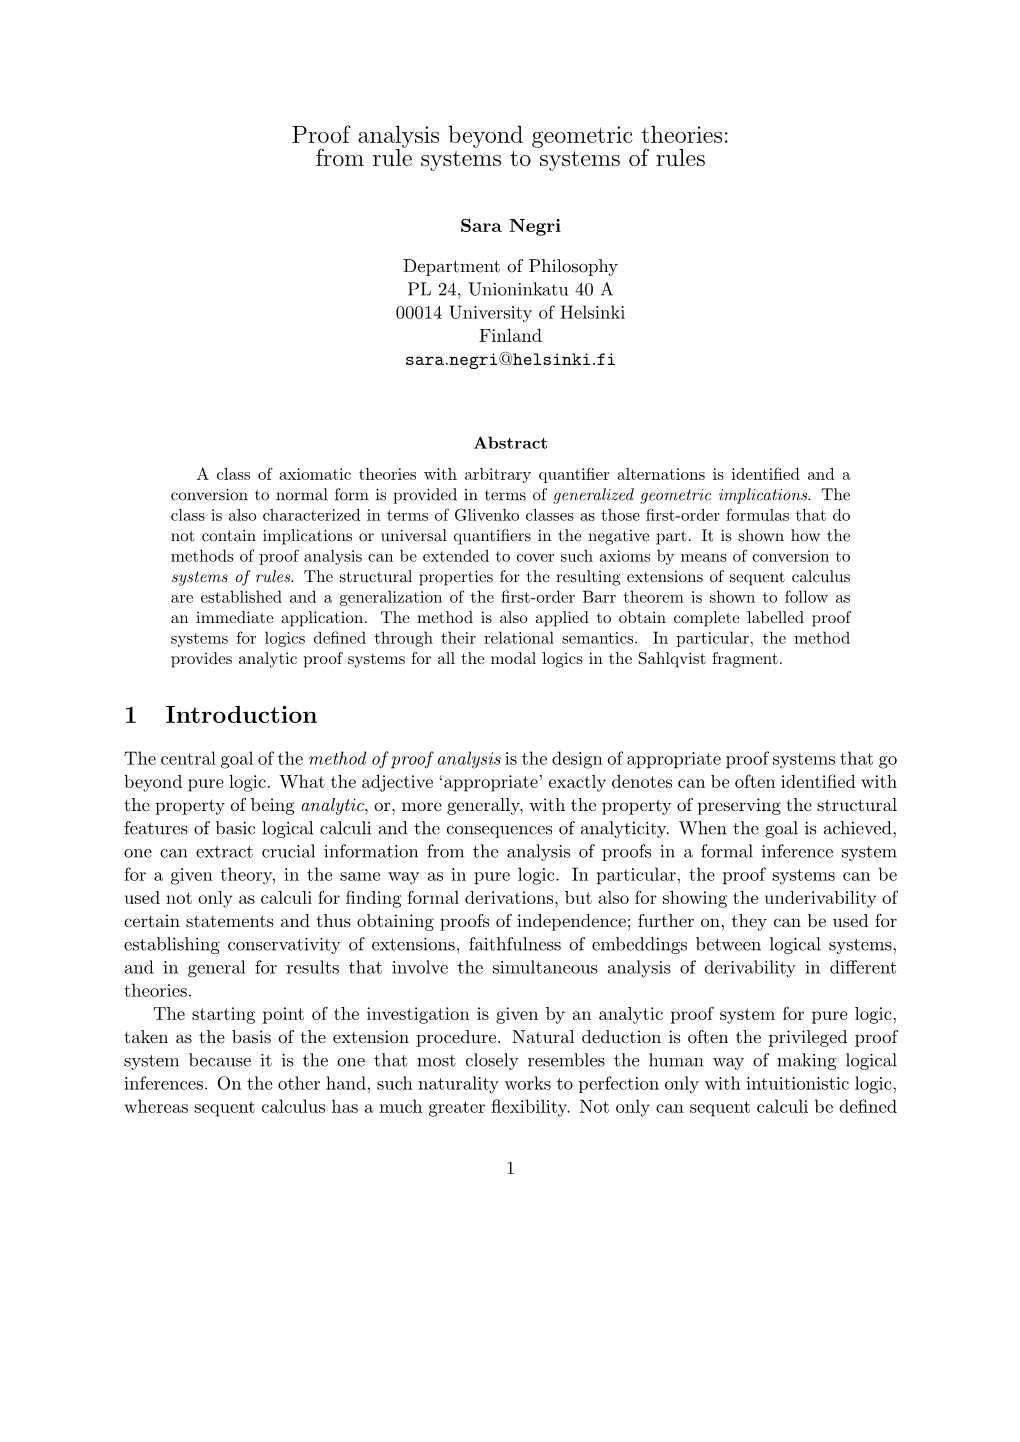 Proof Analysis Beyond Geometric Theories: from Rule Systems to Systems of Rules